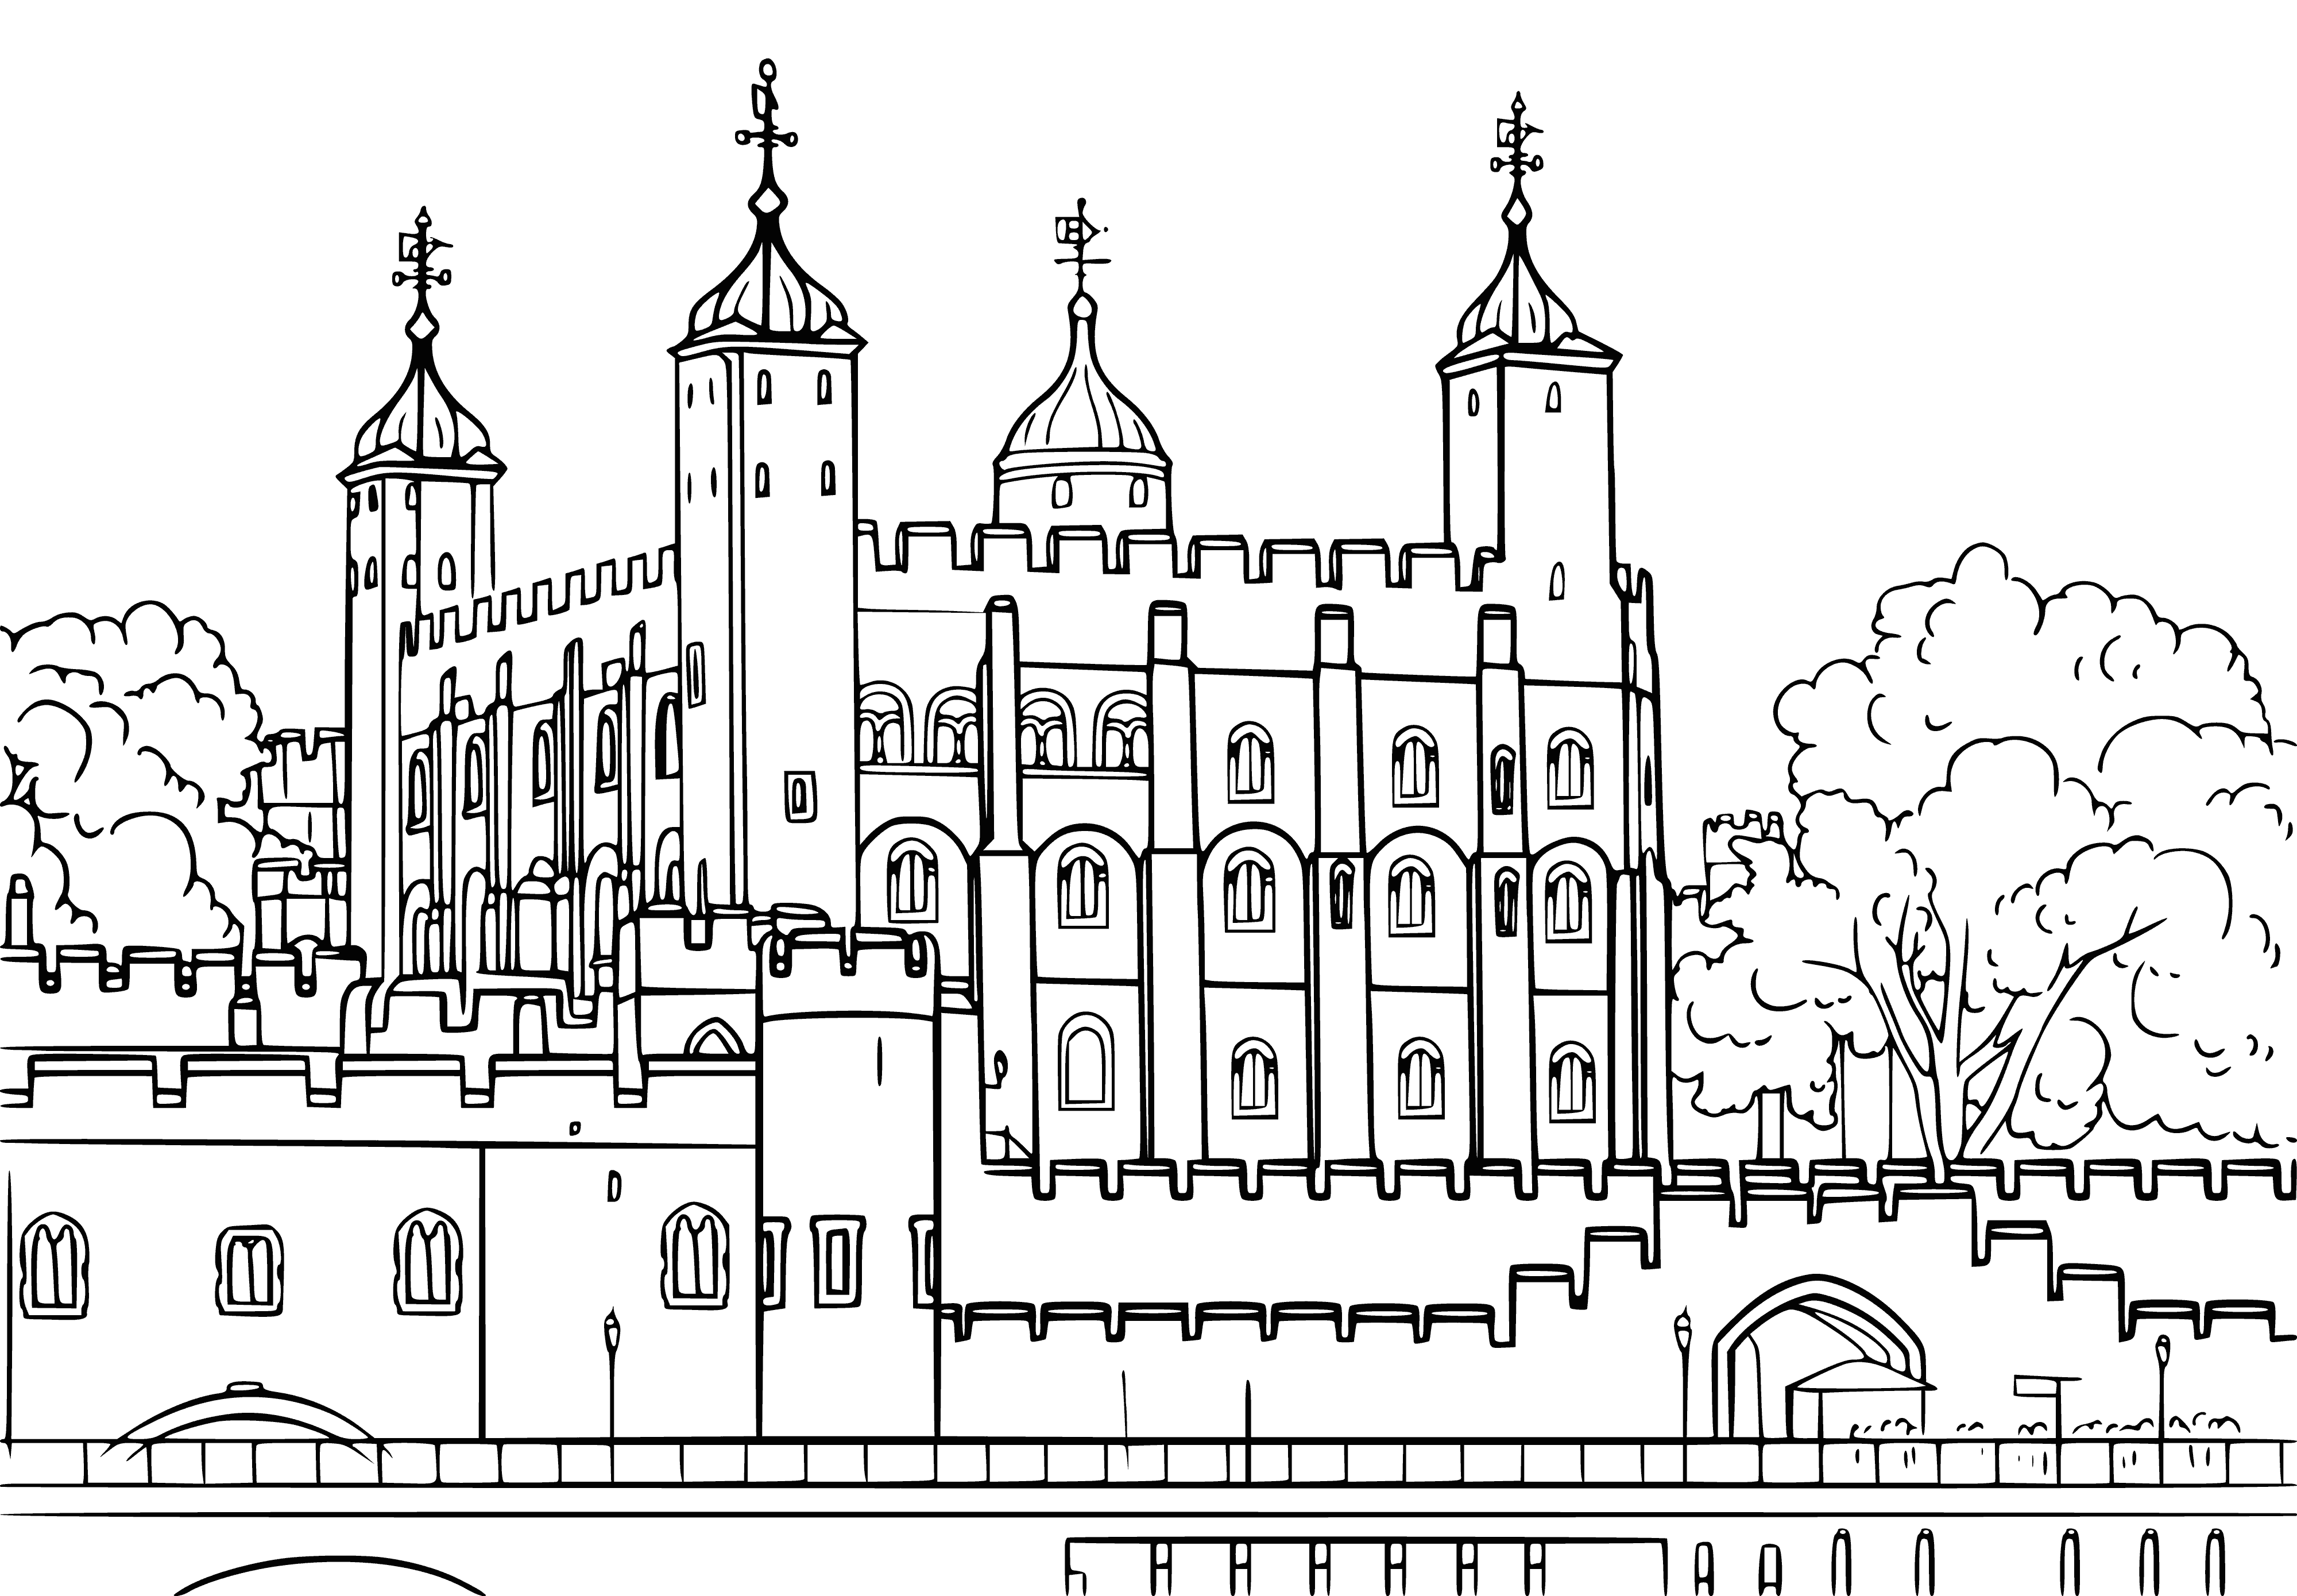 coloring page: The Tower of London, a historic castle located in the heart of London, is a UNESCO World Heritage Site & tourist attraction, formerly serving as palace, prison and execution site.